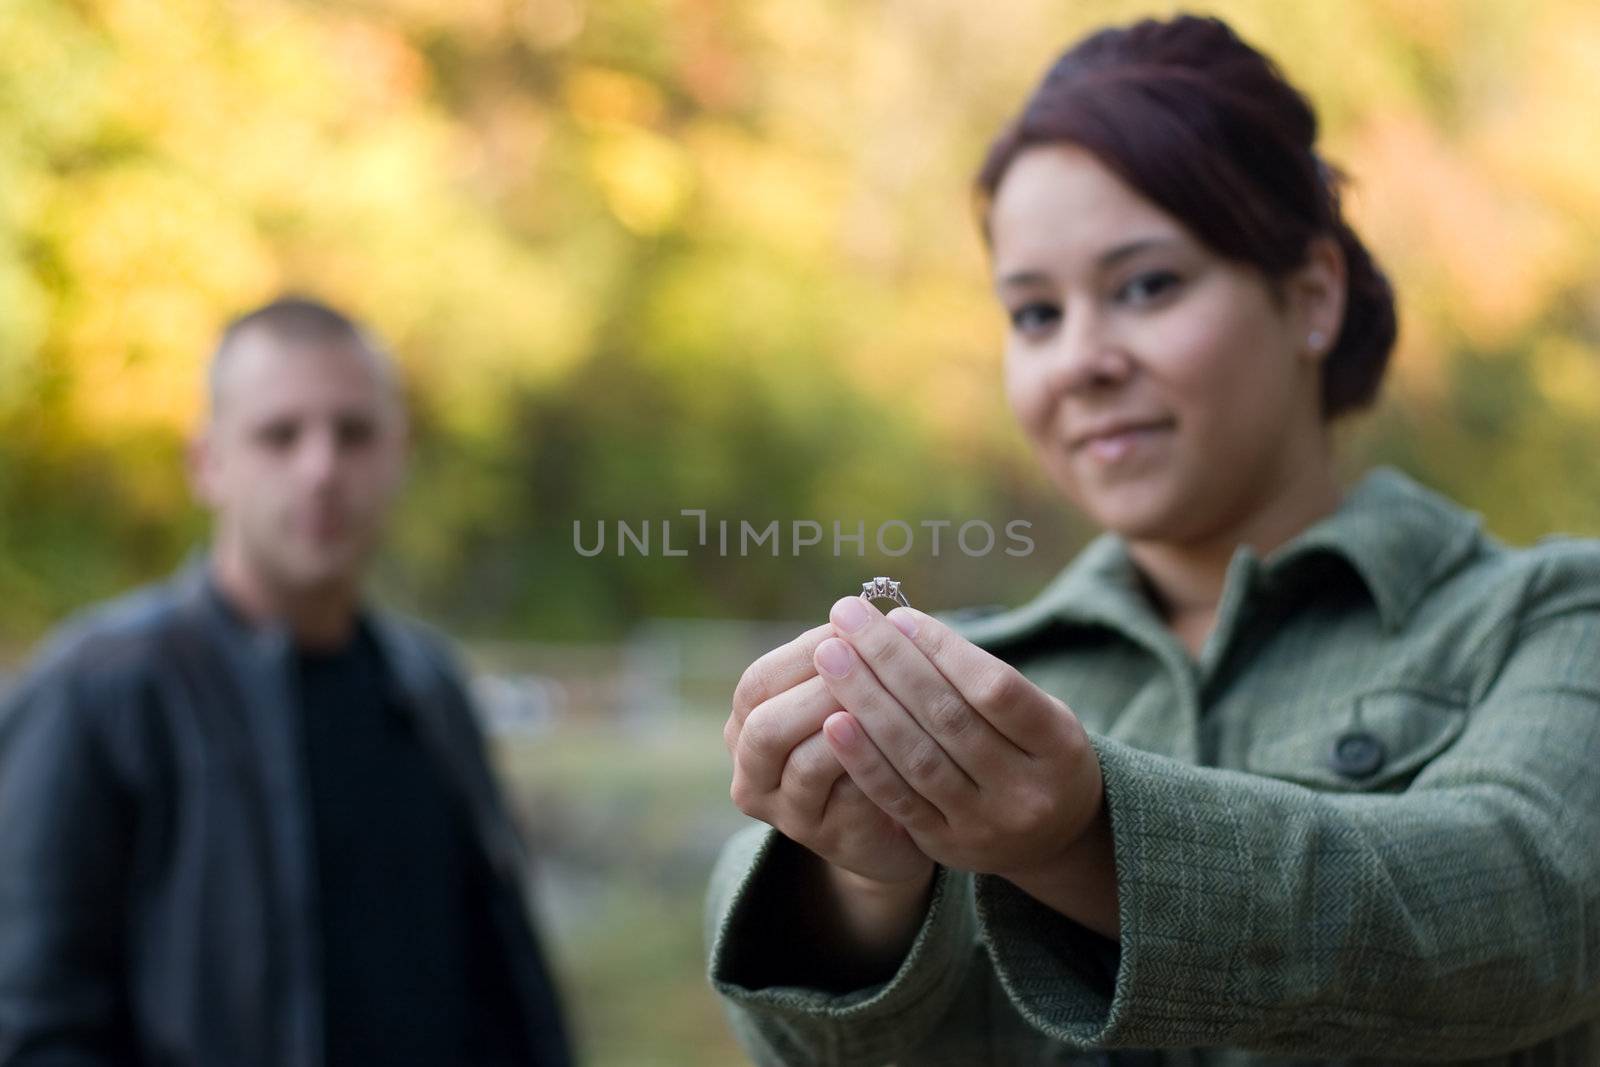 A young woman holding a diamond engagement ring with her fiance in the background.  Shallow depth of field with focus on the ring.